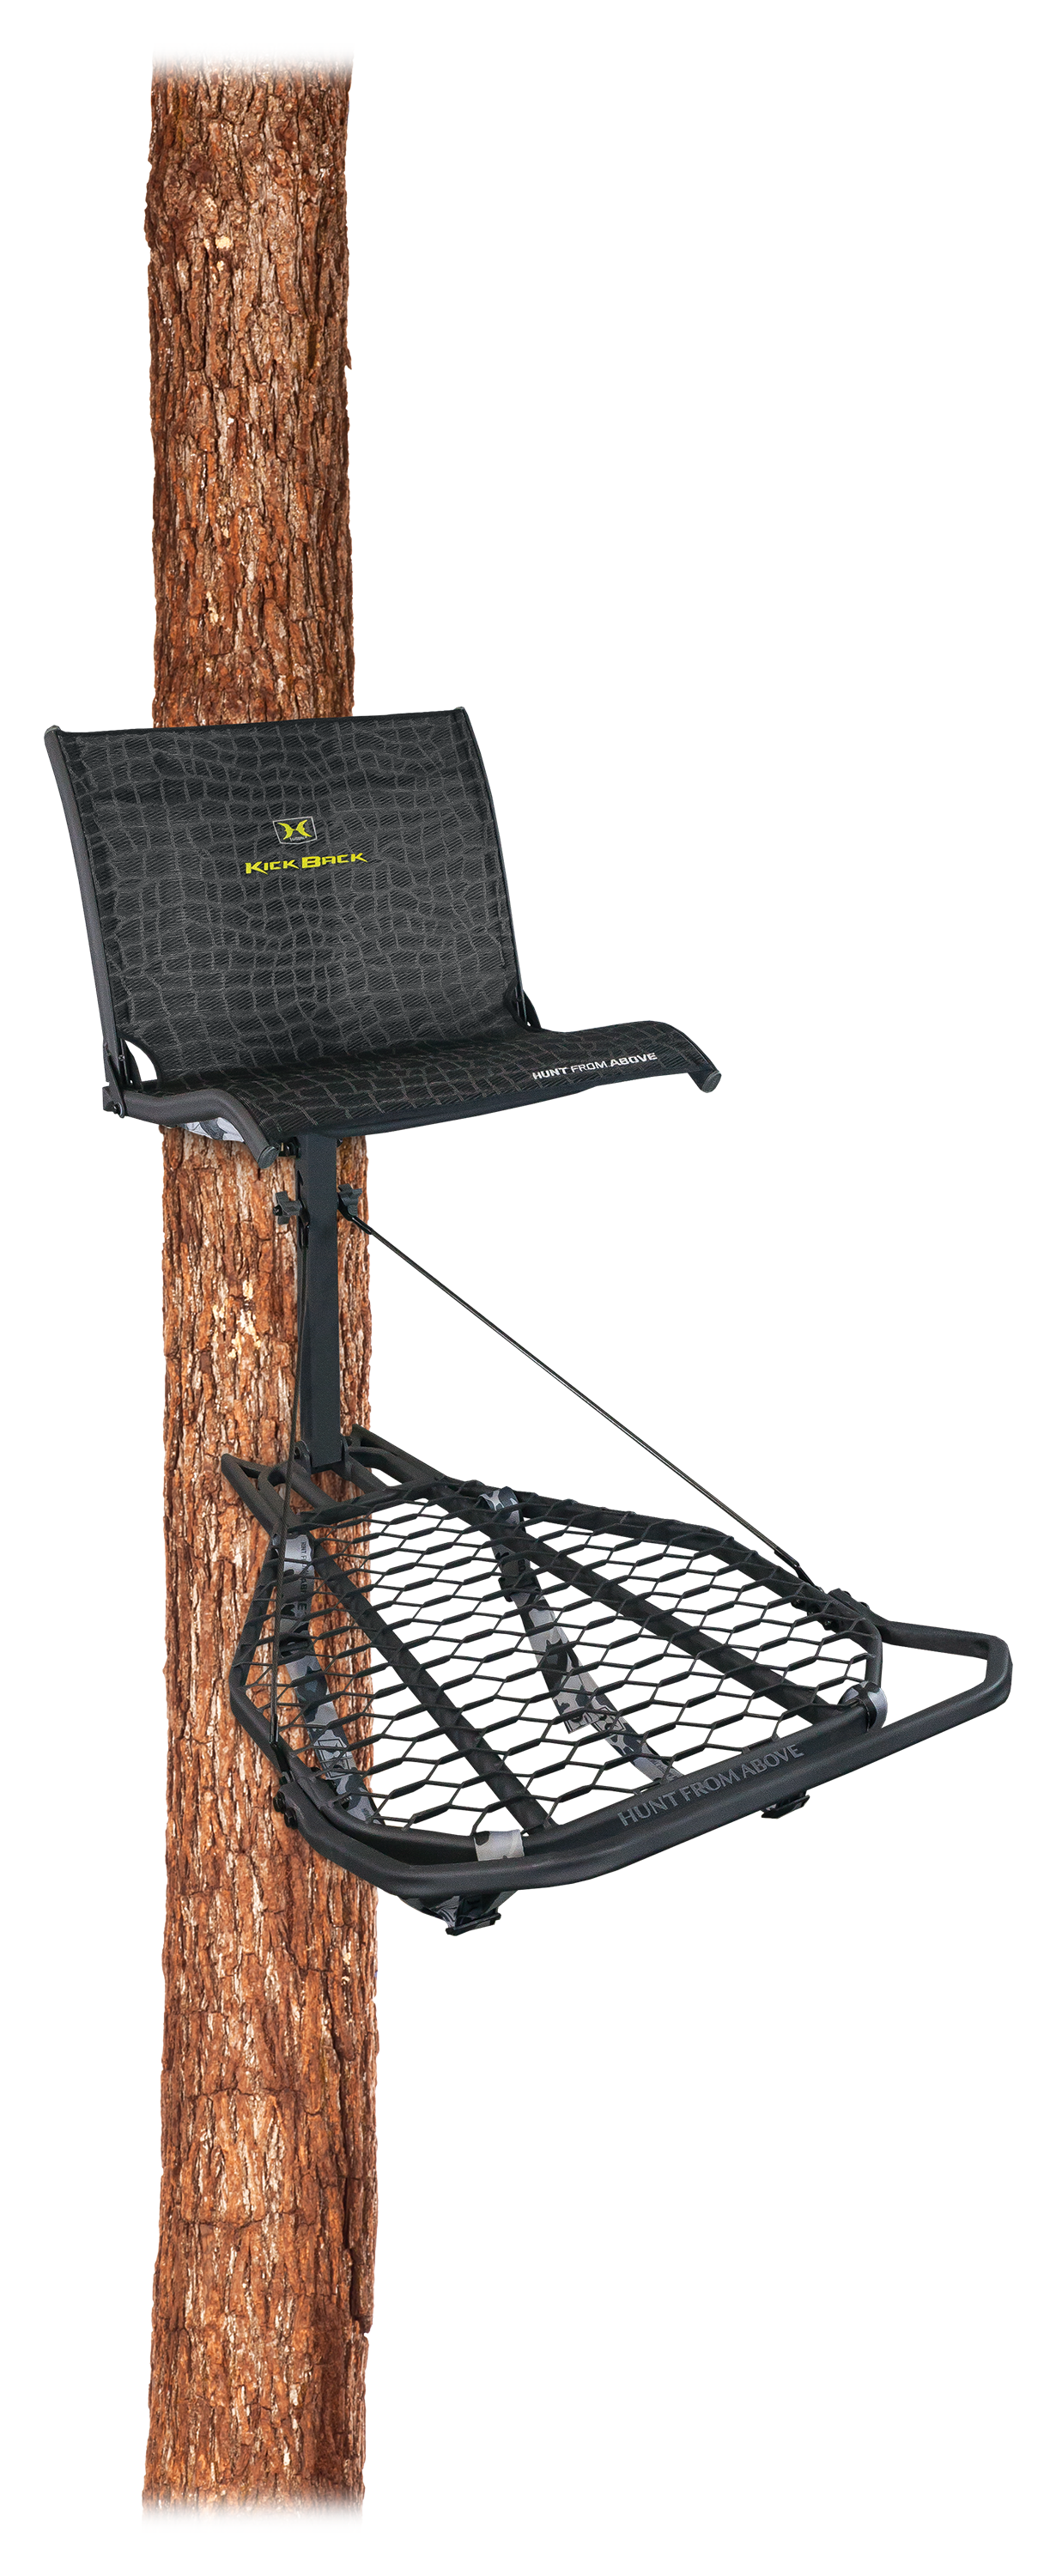 Hawk Black Kickback Lvl Hang-On Tree Stand with Leg Extension Footrest (2-Pack)